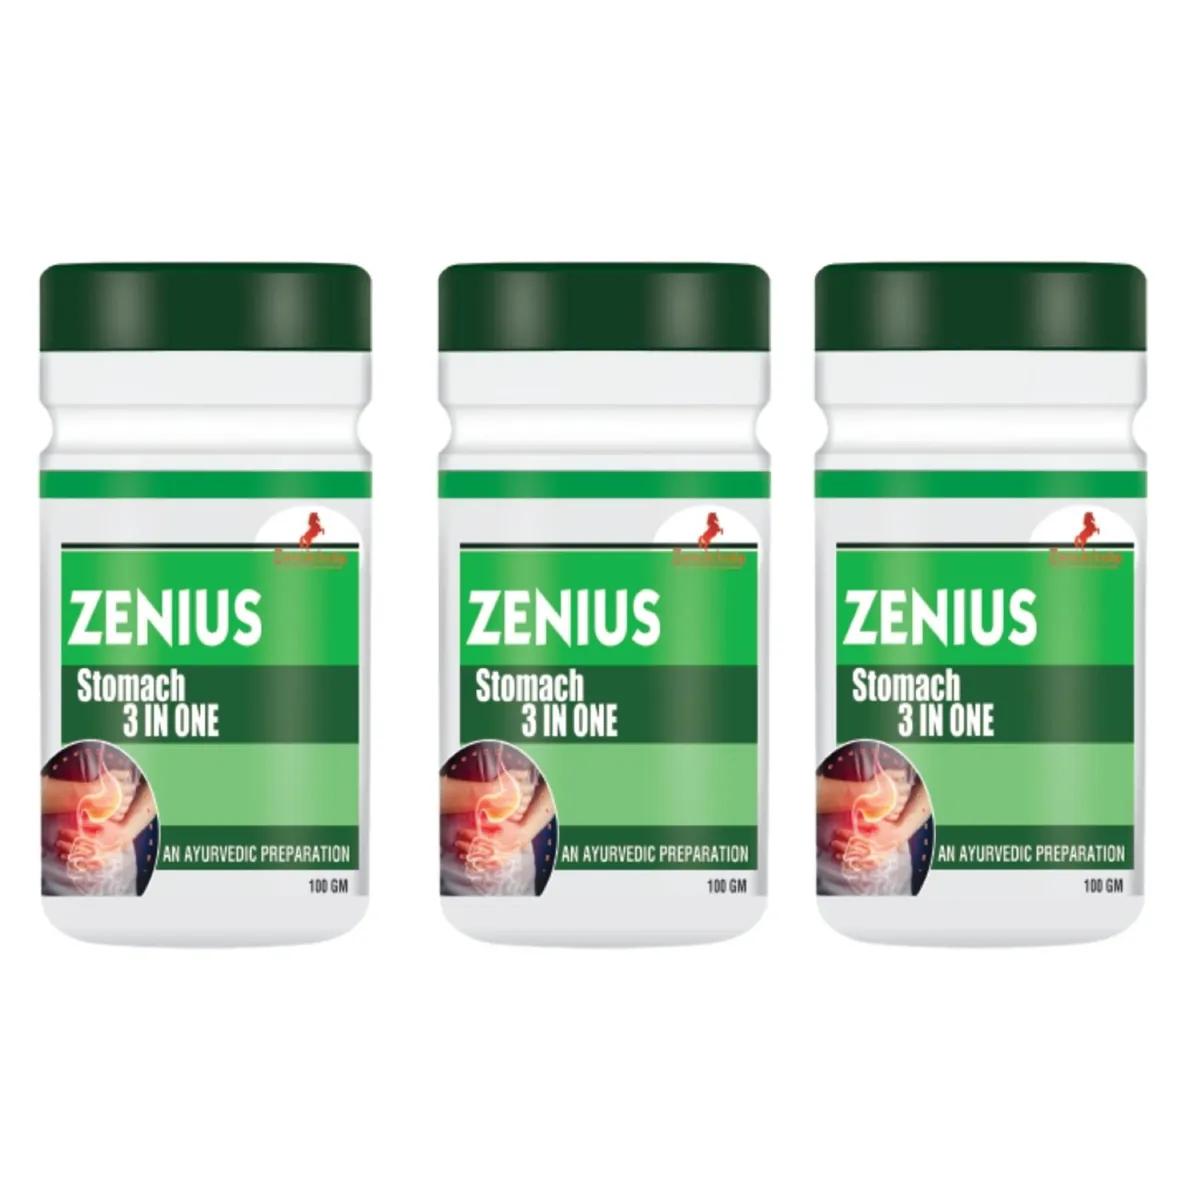 Zenius Stomach 3In One 100g, Pack of 3